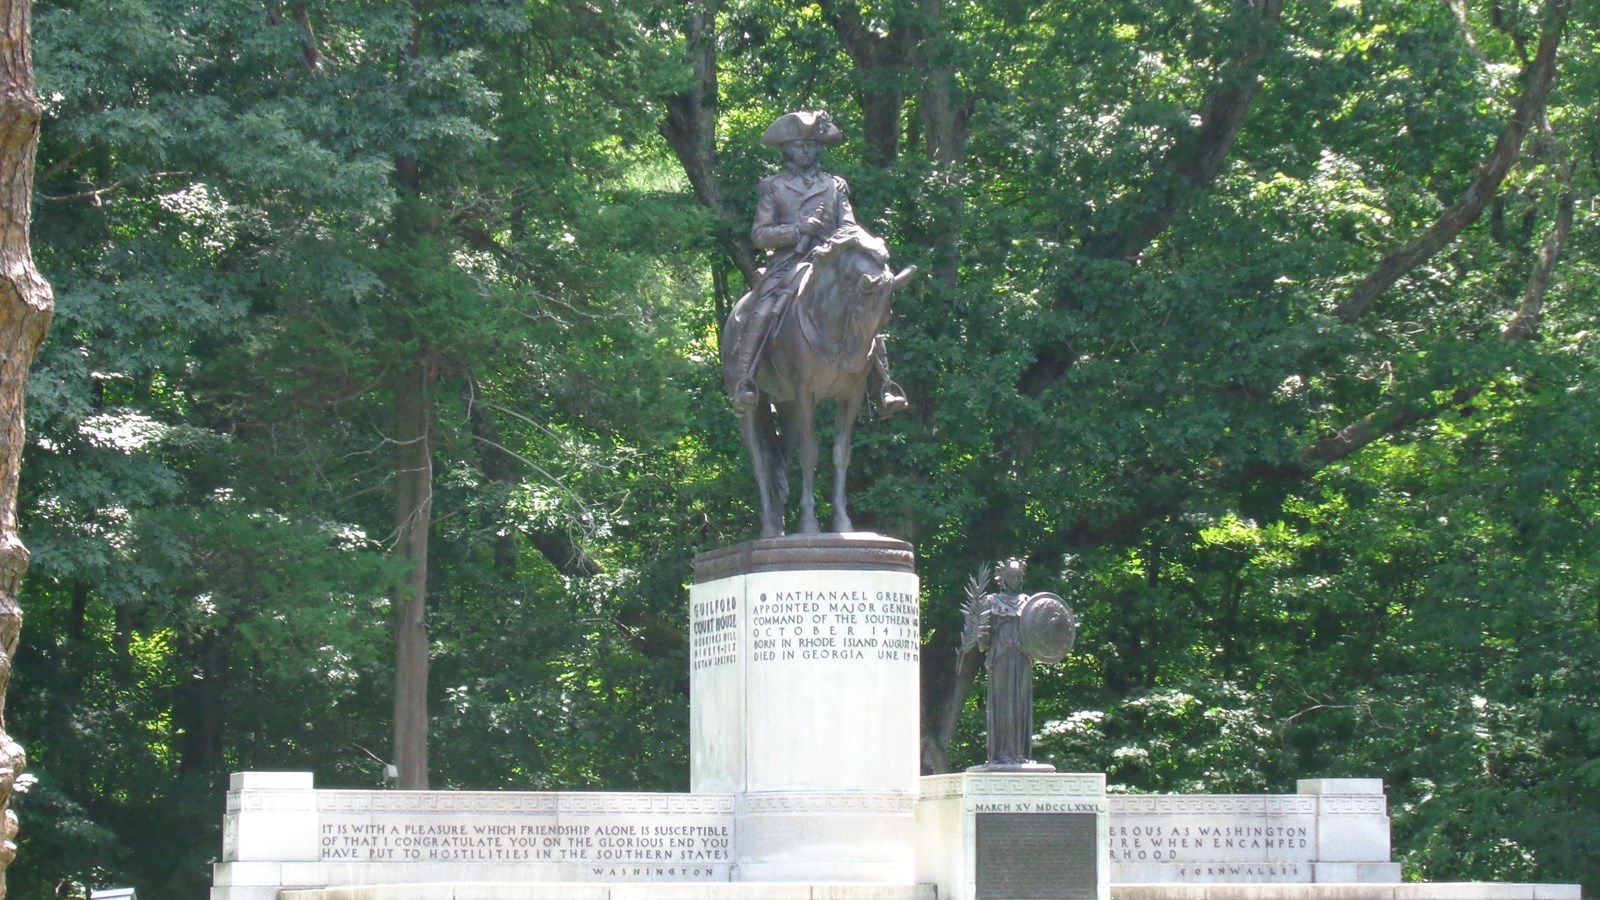 A larger than live statue of Greene on horseback atop a pedestal. Behind him is a lush forest.